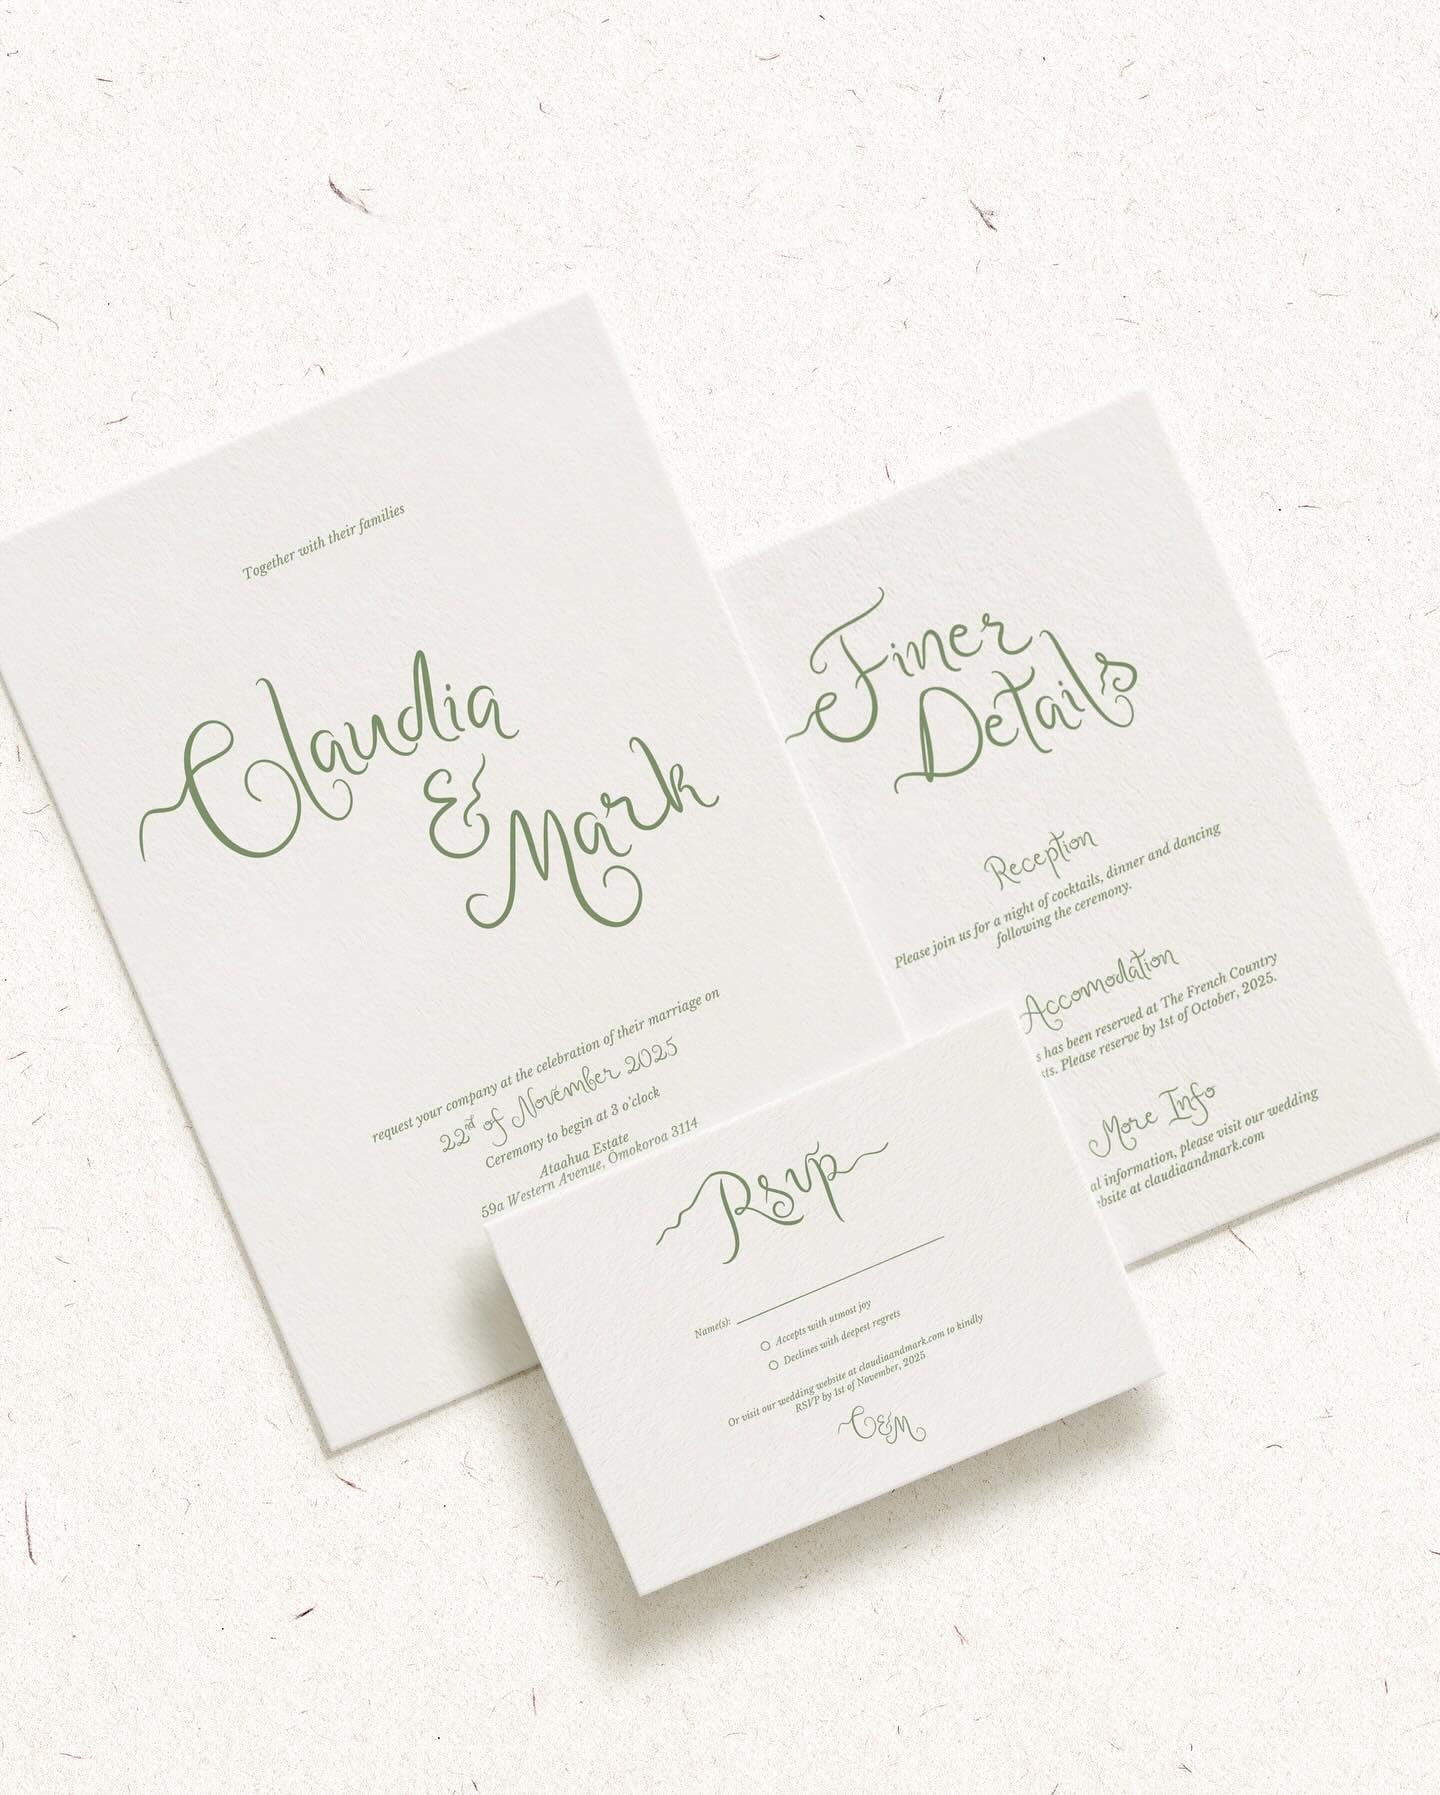 We&rsquo;ve got your back!🫡 Through close collaboration and meticulous attention to detail, we transform your vision into a timeless masterpiece. Let&rsquo;s craft a wedding stationery suite as unique as your love story!

Personalised perfection awa